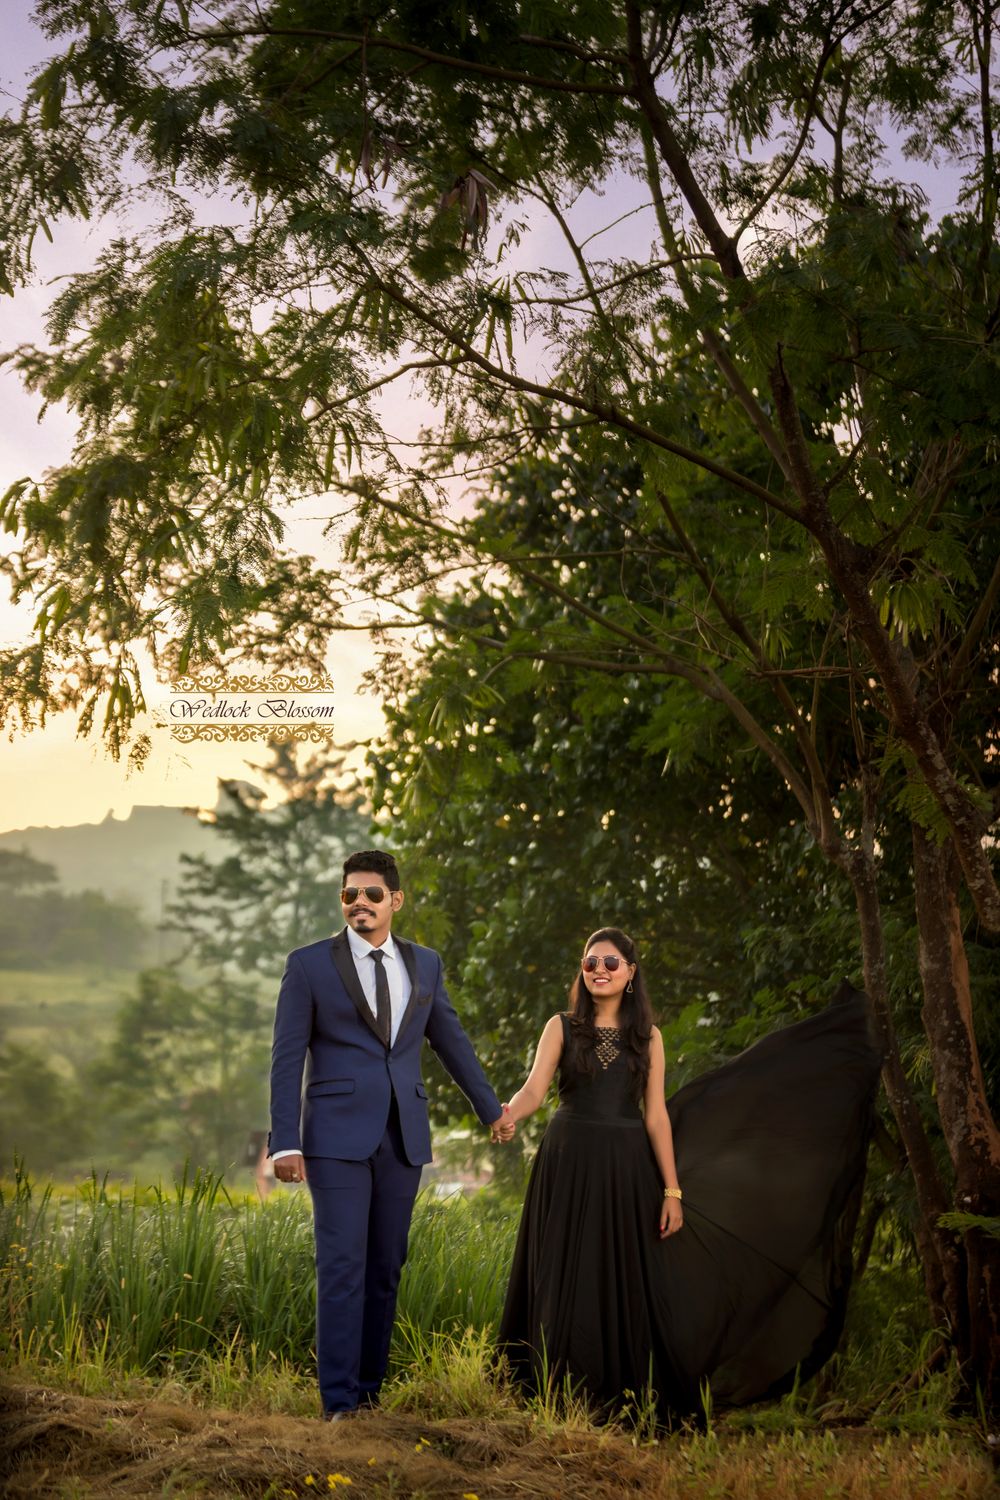 Photo From Shantanu & Pooja - By Wedlock Blossom